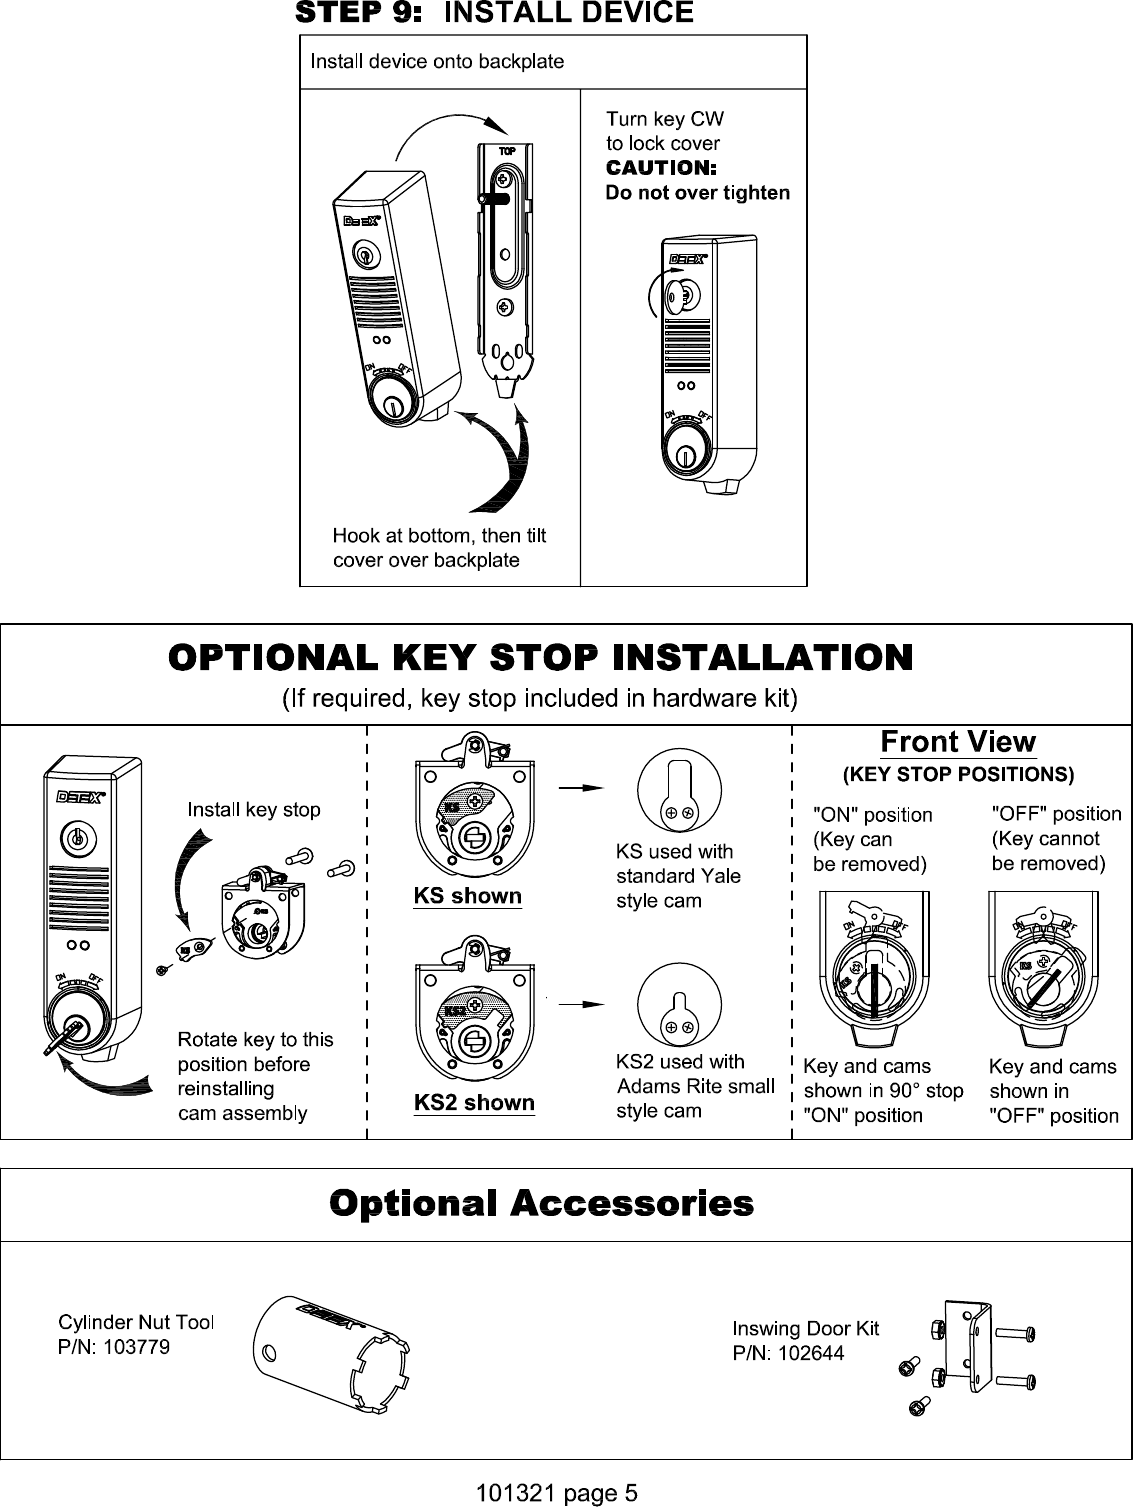 Page 5 of 7 - Detex  EAX-500 Installation Instructions 101321Press Quality